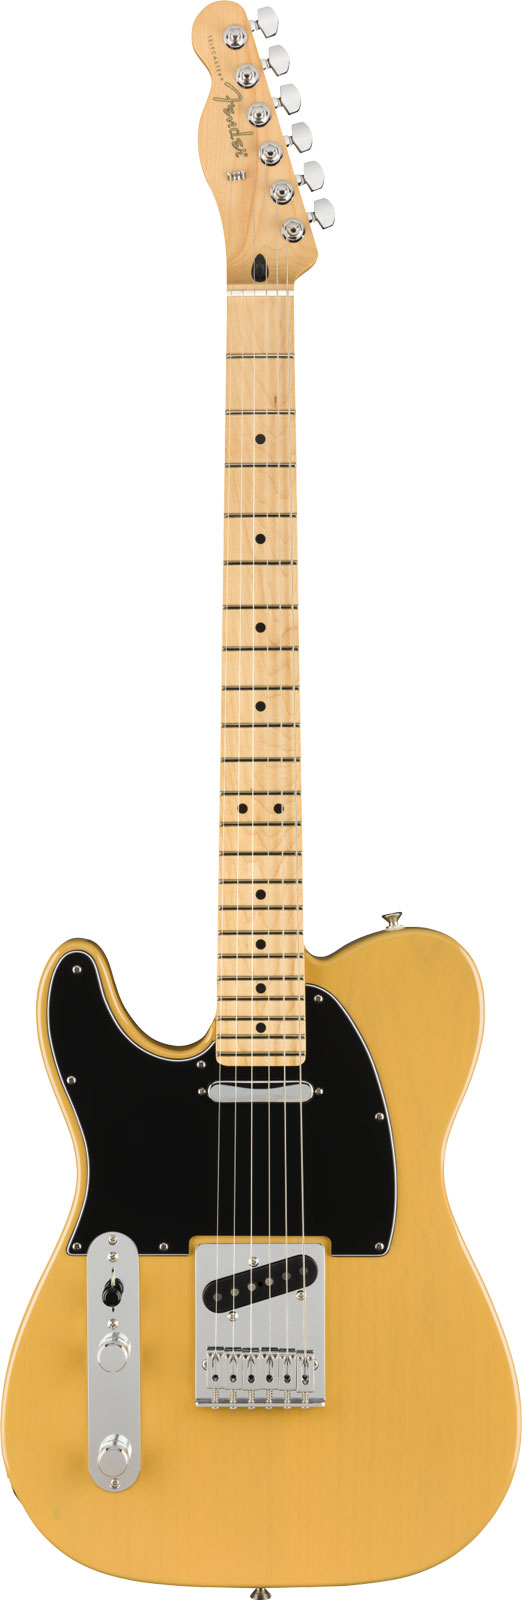 FENDER MEXICAN PLAYER TELECASTER LHED MN, BUTTERSCOTCH BLONDE